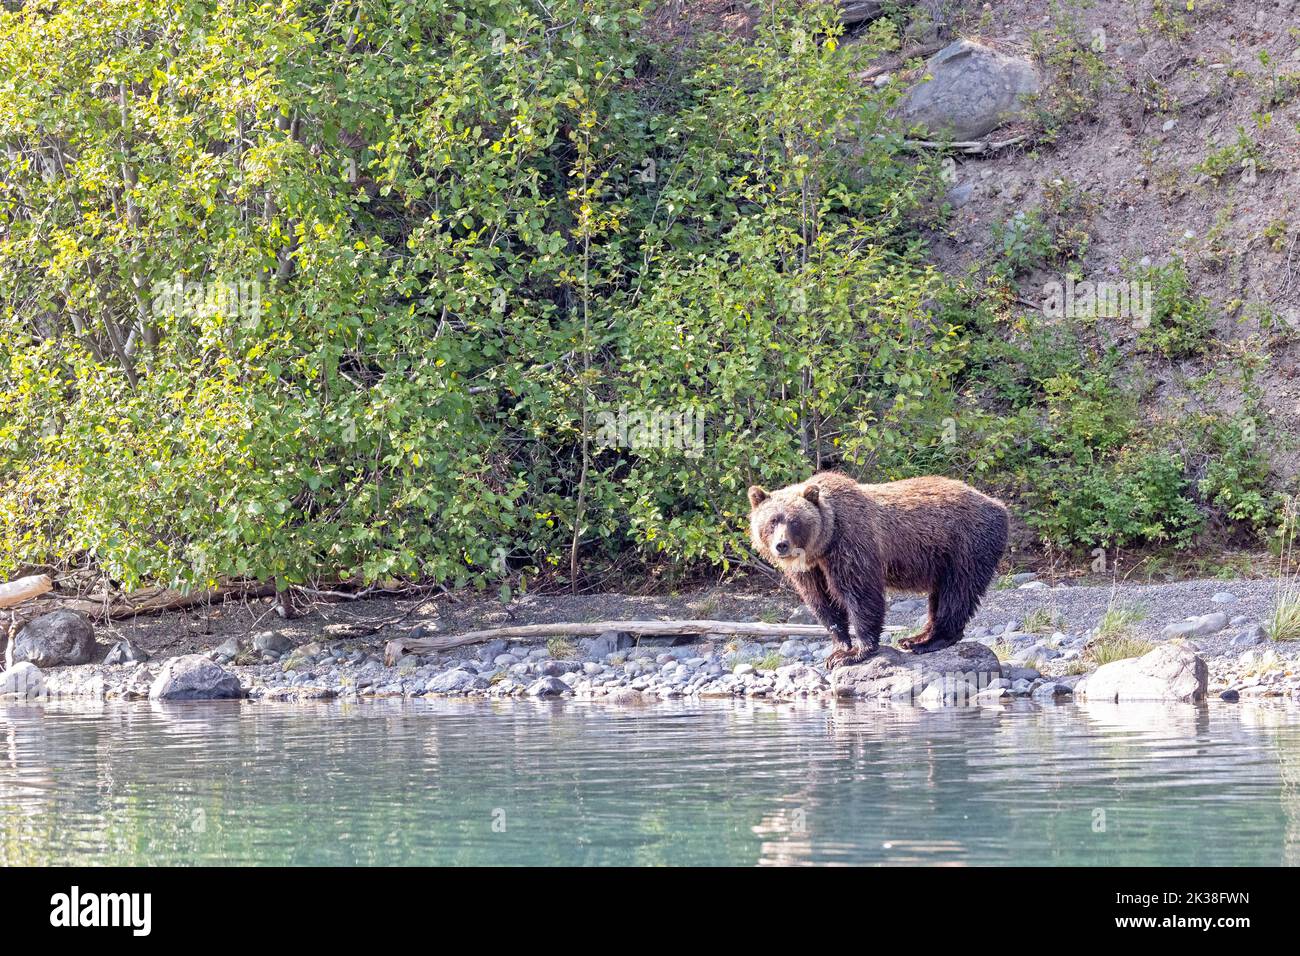 Grizzly Bear Balancing on Rock Stock Photo